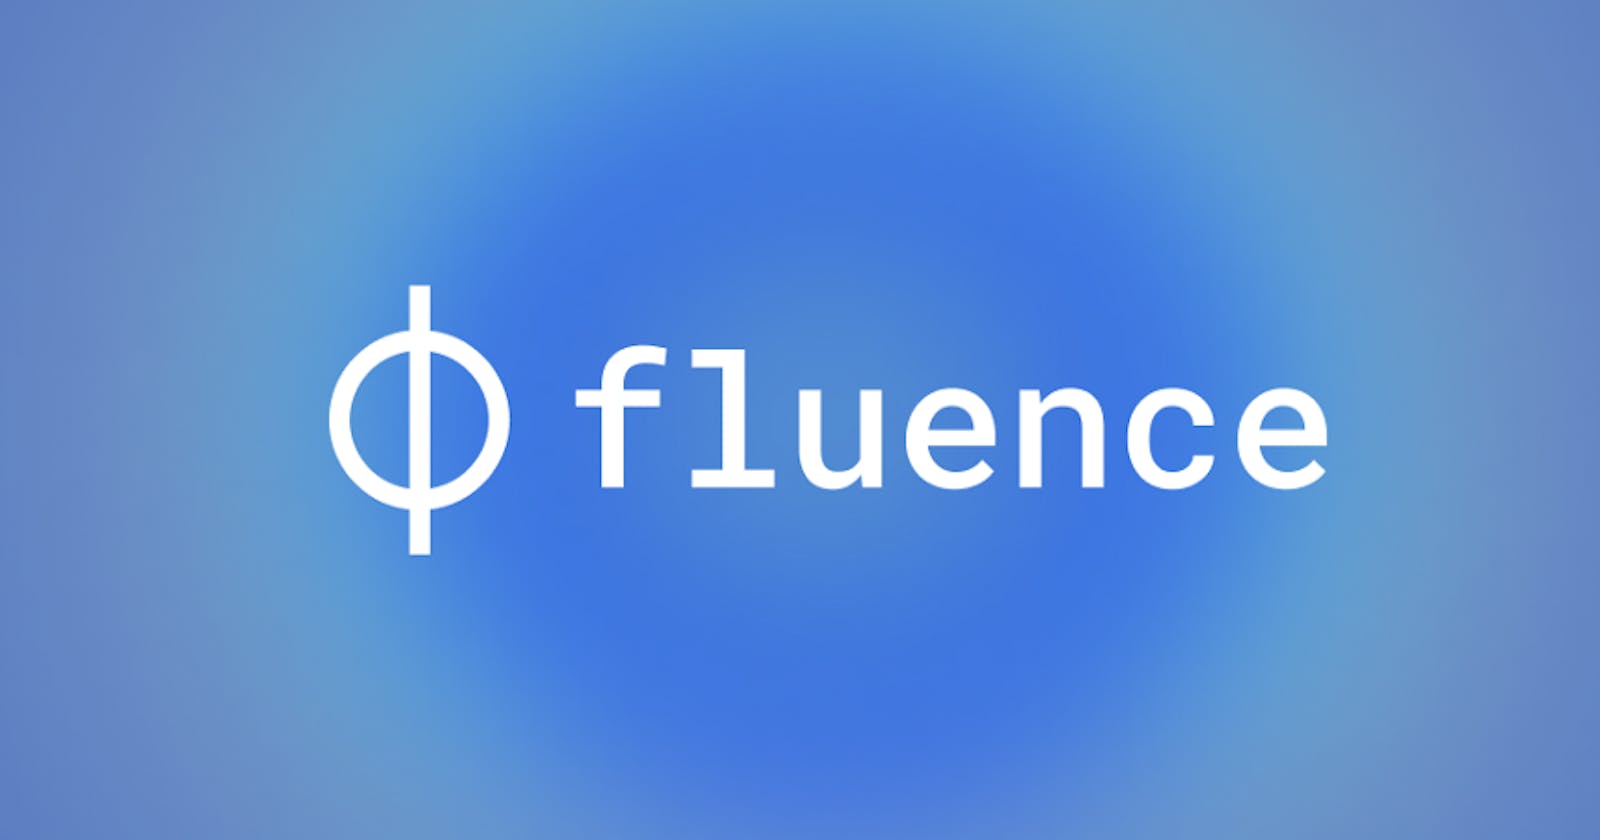 The importance of off-chain compute in Web3 and the [in]fluence of Fluence.